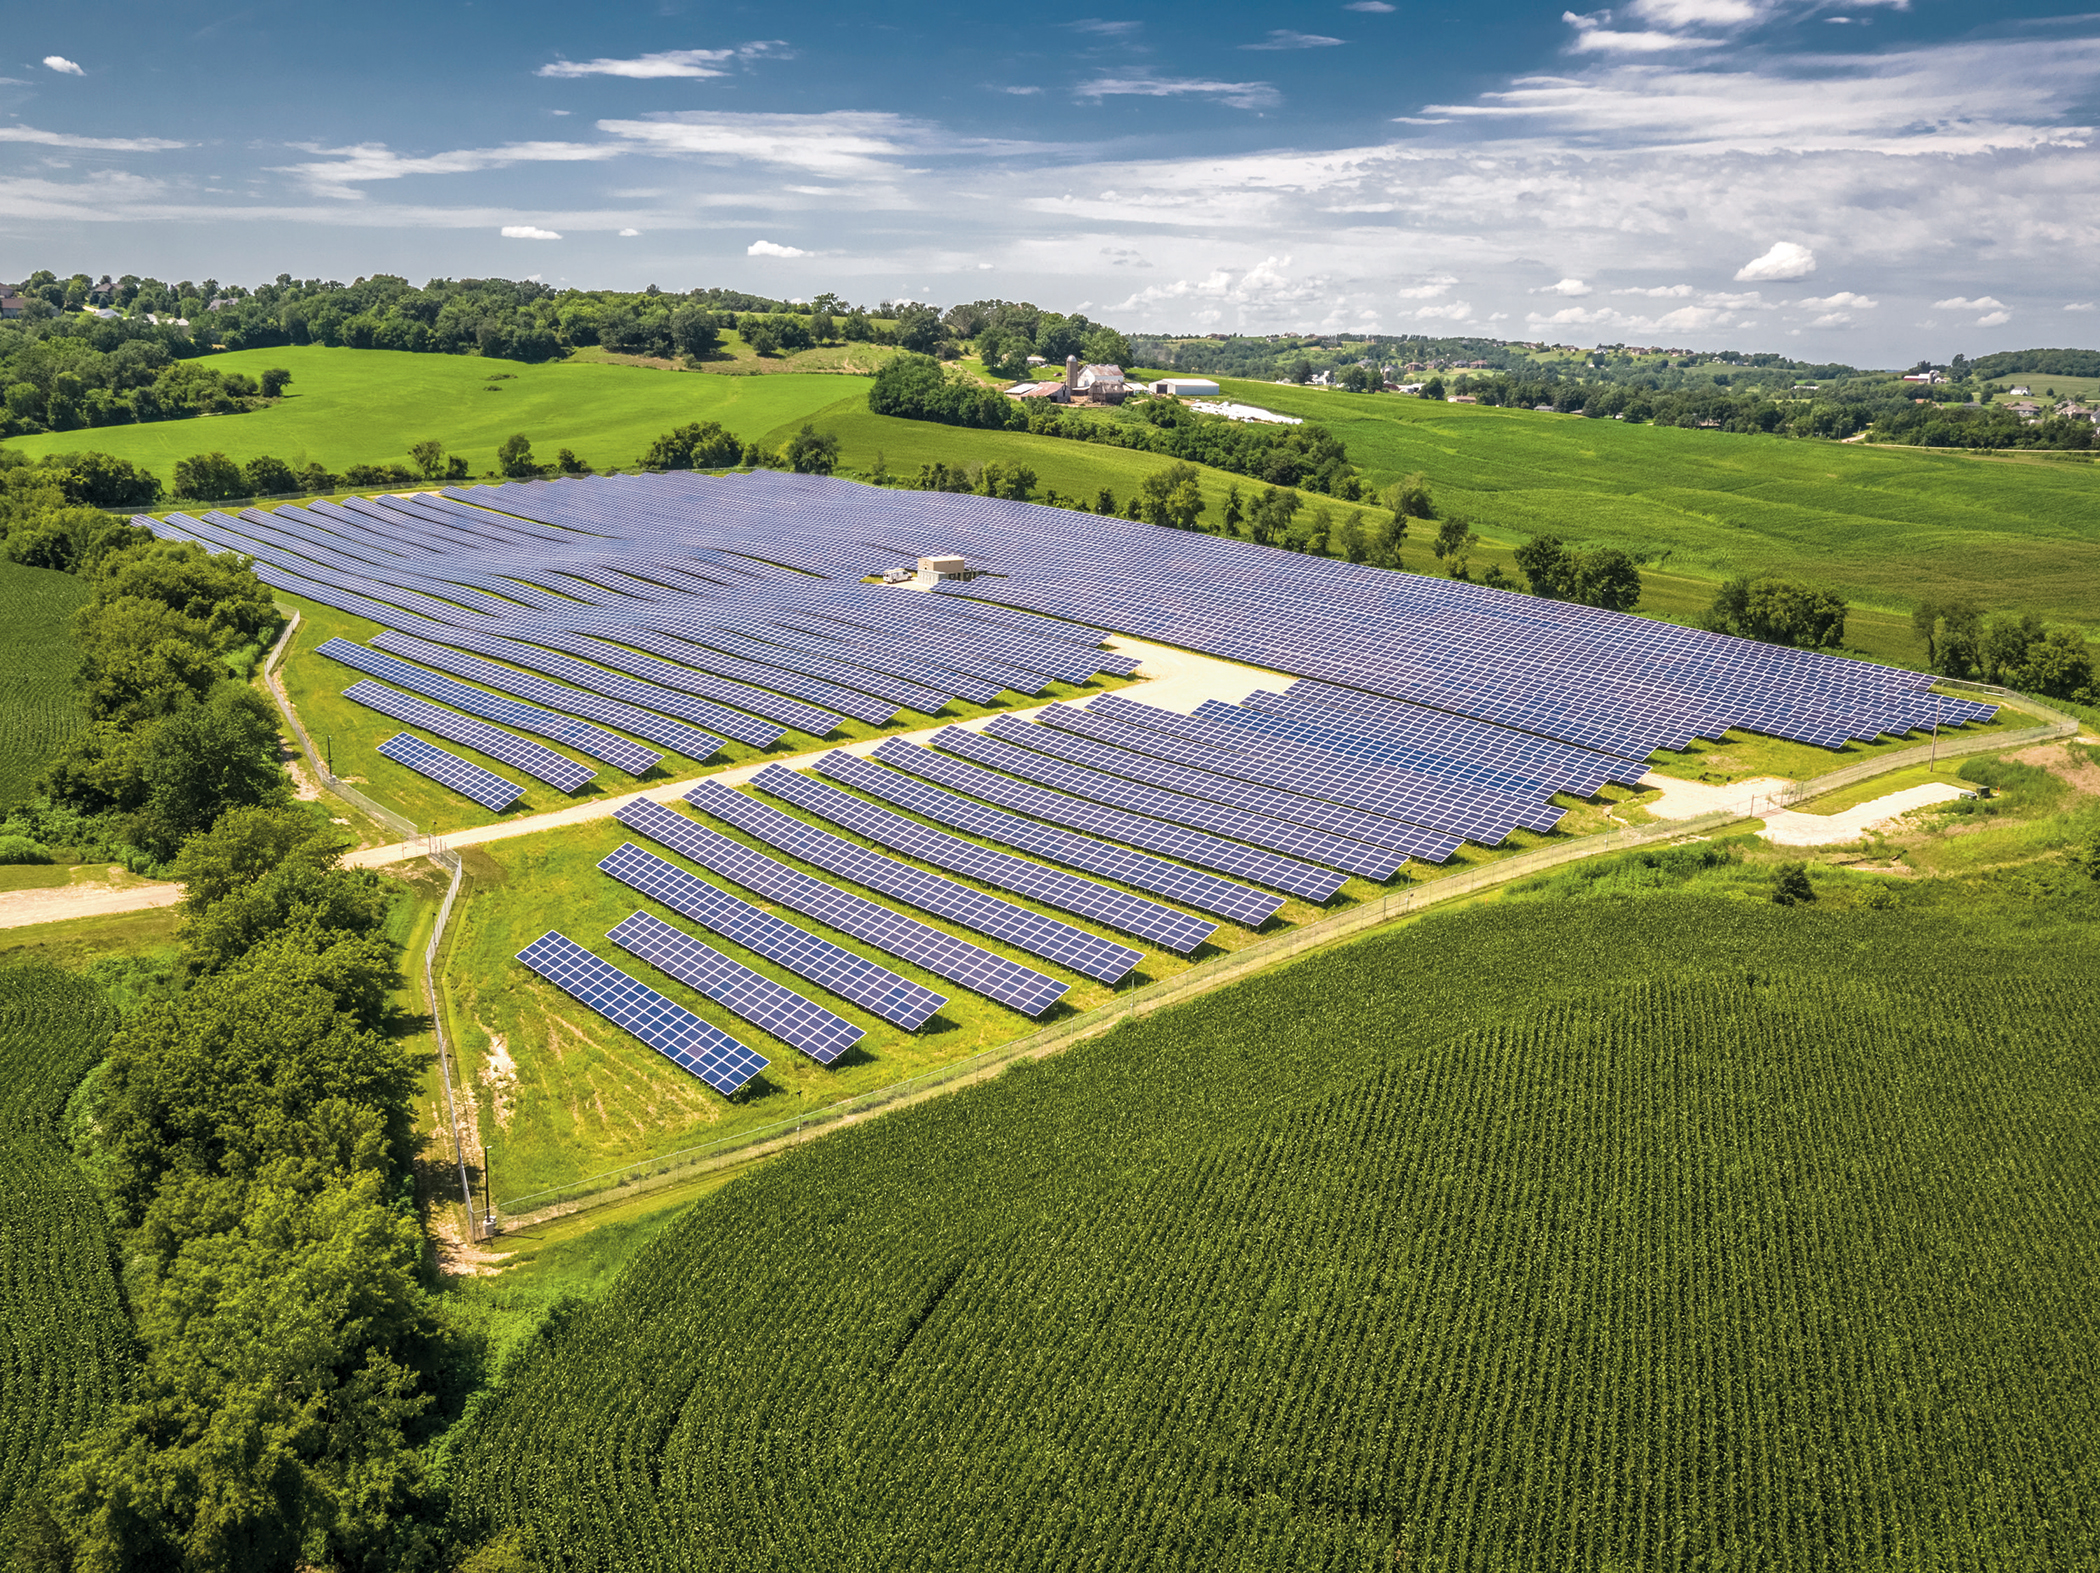 Aerial view of a solar farm surrounded by trees.